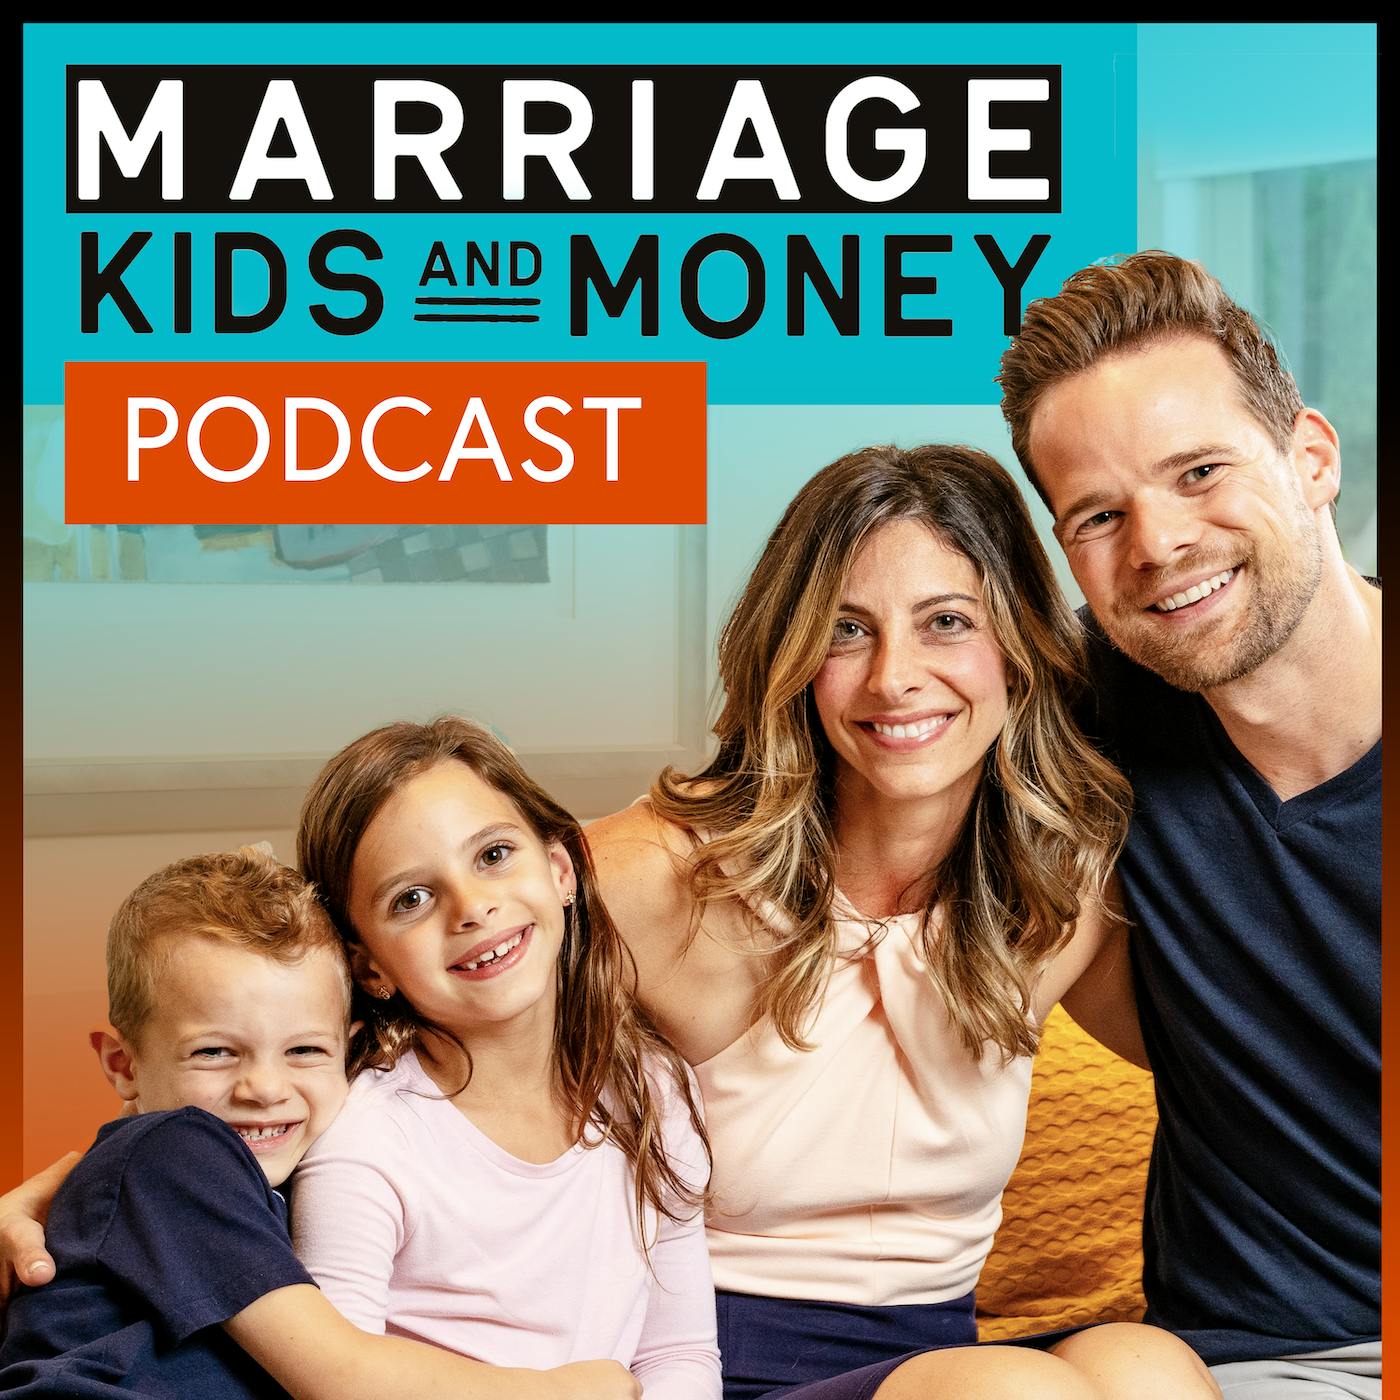 A Stay-at-Home Dad Who Makes $200k/Yr in Passive Income | Sam Dogen from Financial Samurai (BEST OF MKM)